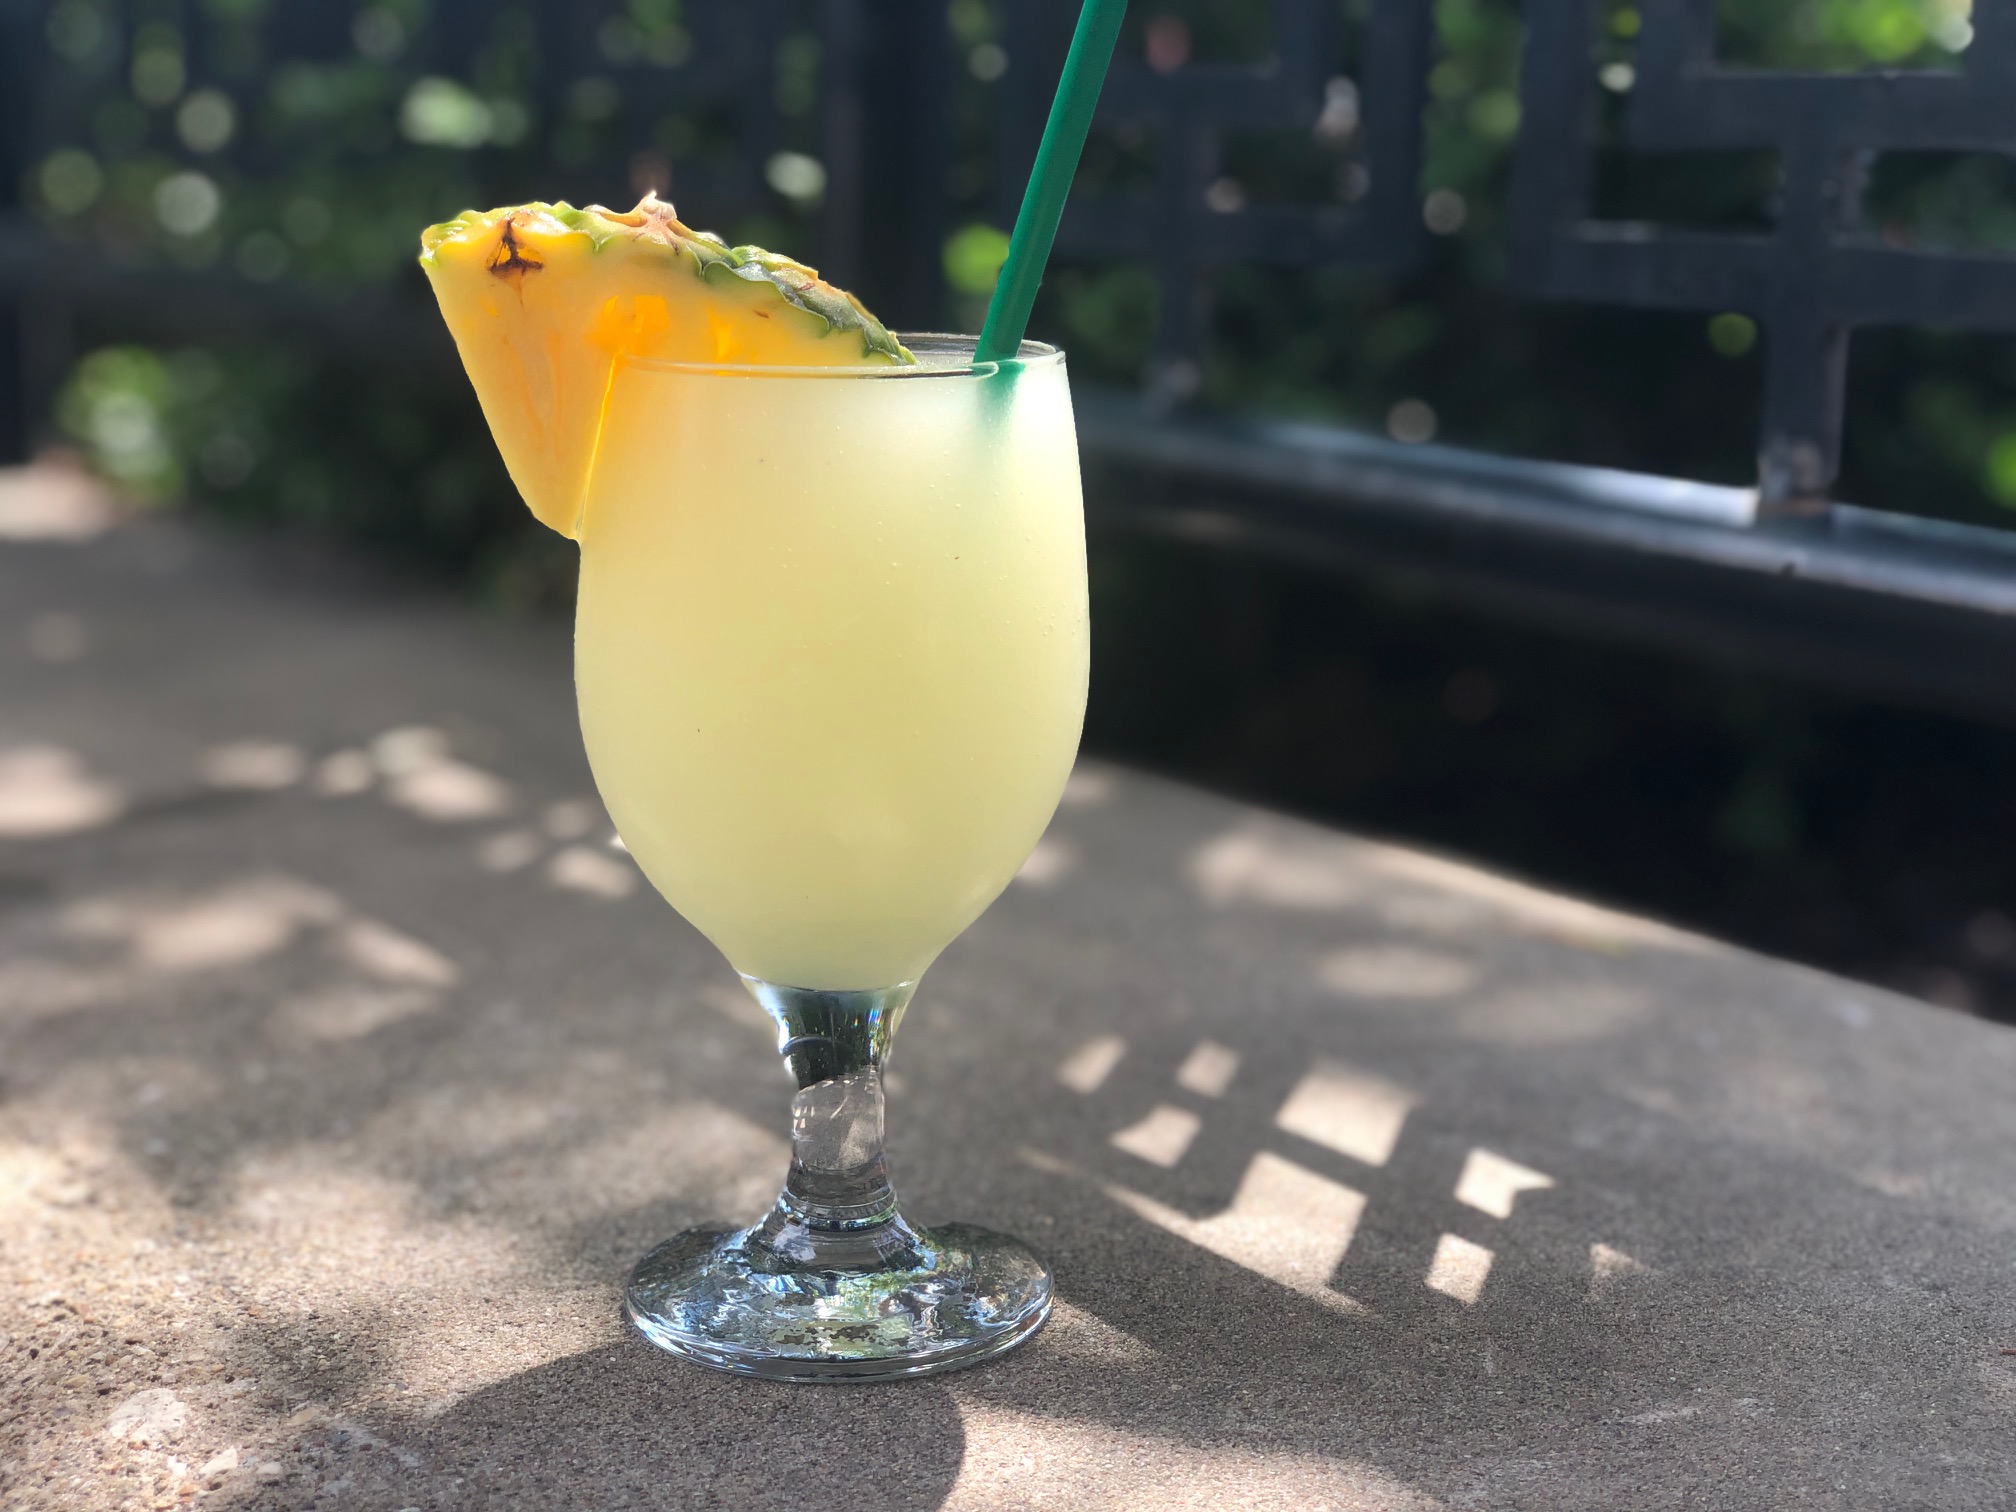 On a concrete ledge at Esquire's patio in Downtown Champaign, there is a wine glass filled with a yellow frozen pineapple margarita with a slice of pineapple as a garnish on the left side. Photo by Alyssa Buckley.